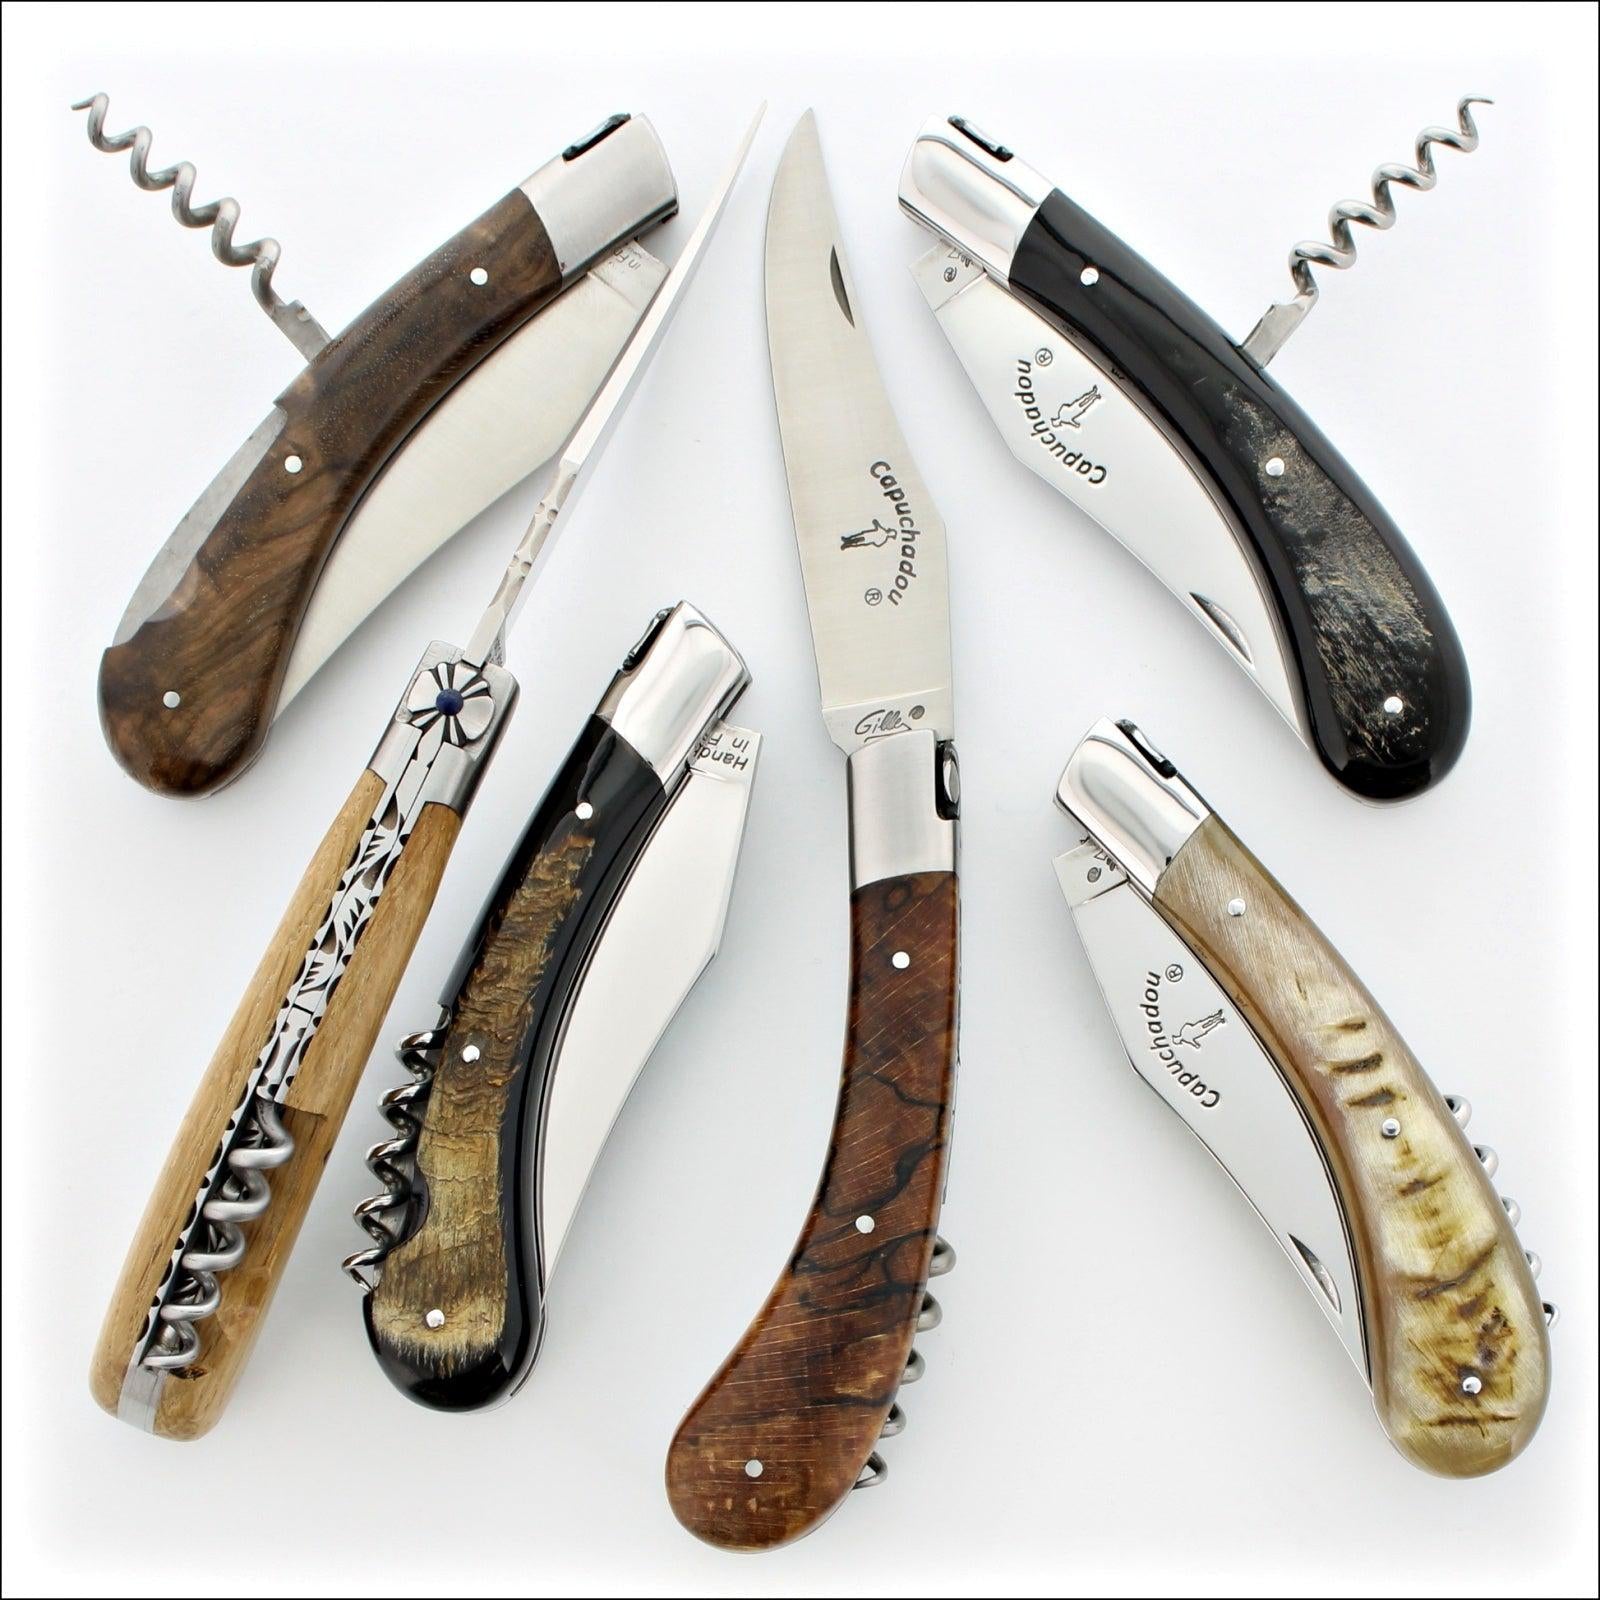 6 Capuchadou 12 cm Corkscrew Knives with in a variety of handle material such as ram horn, oak barrel and walnut